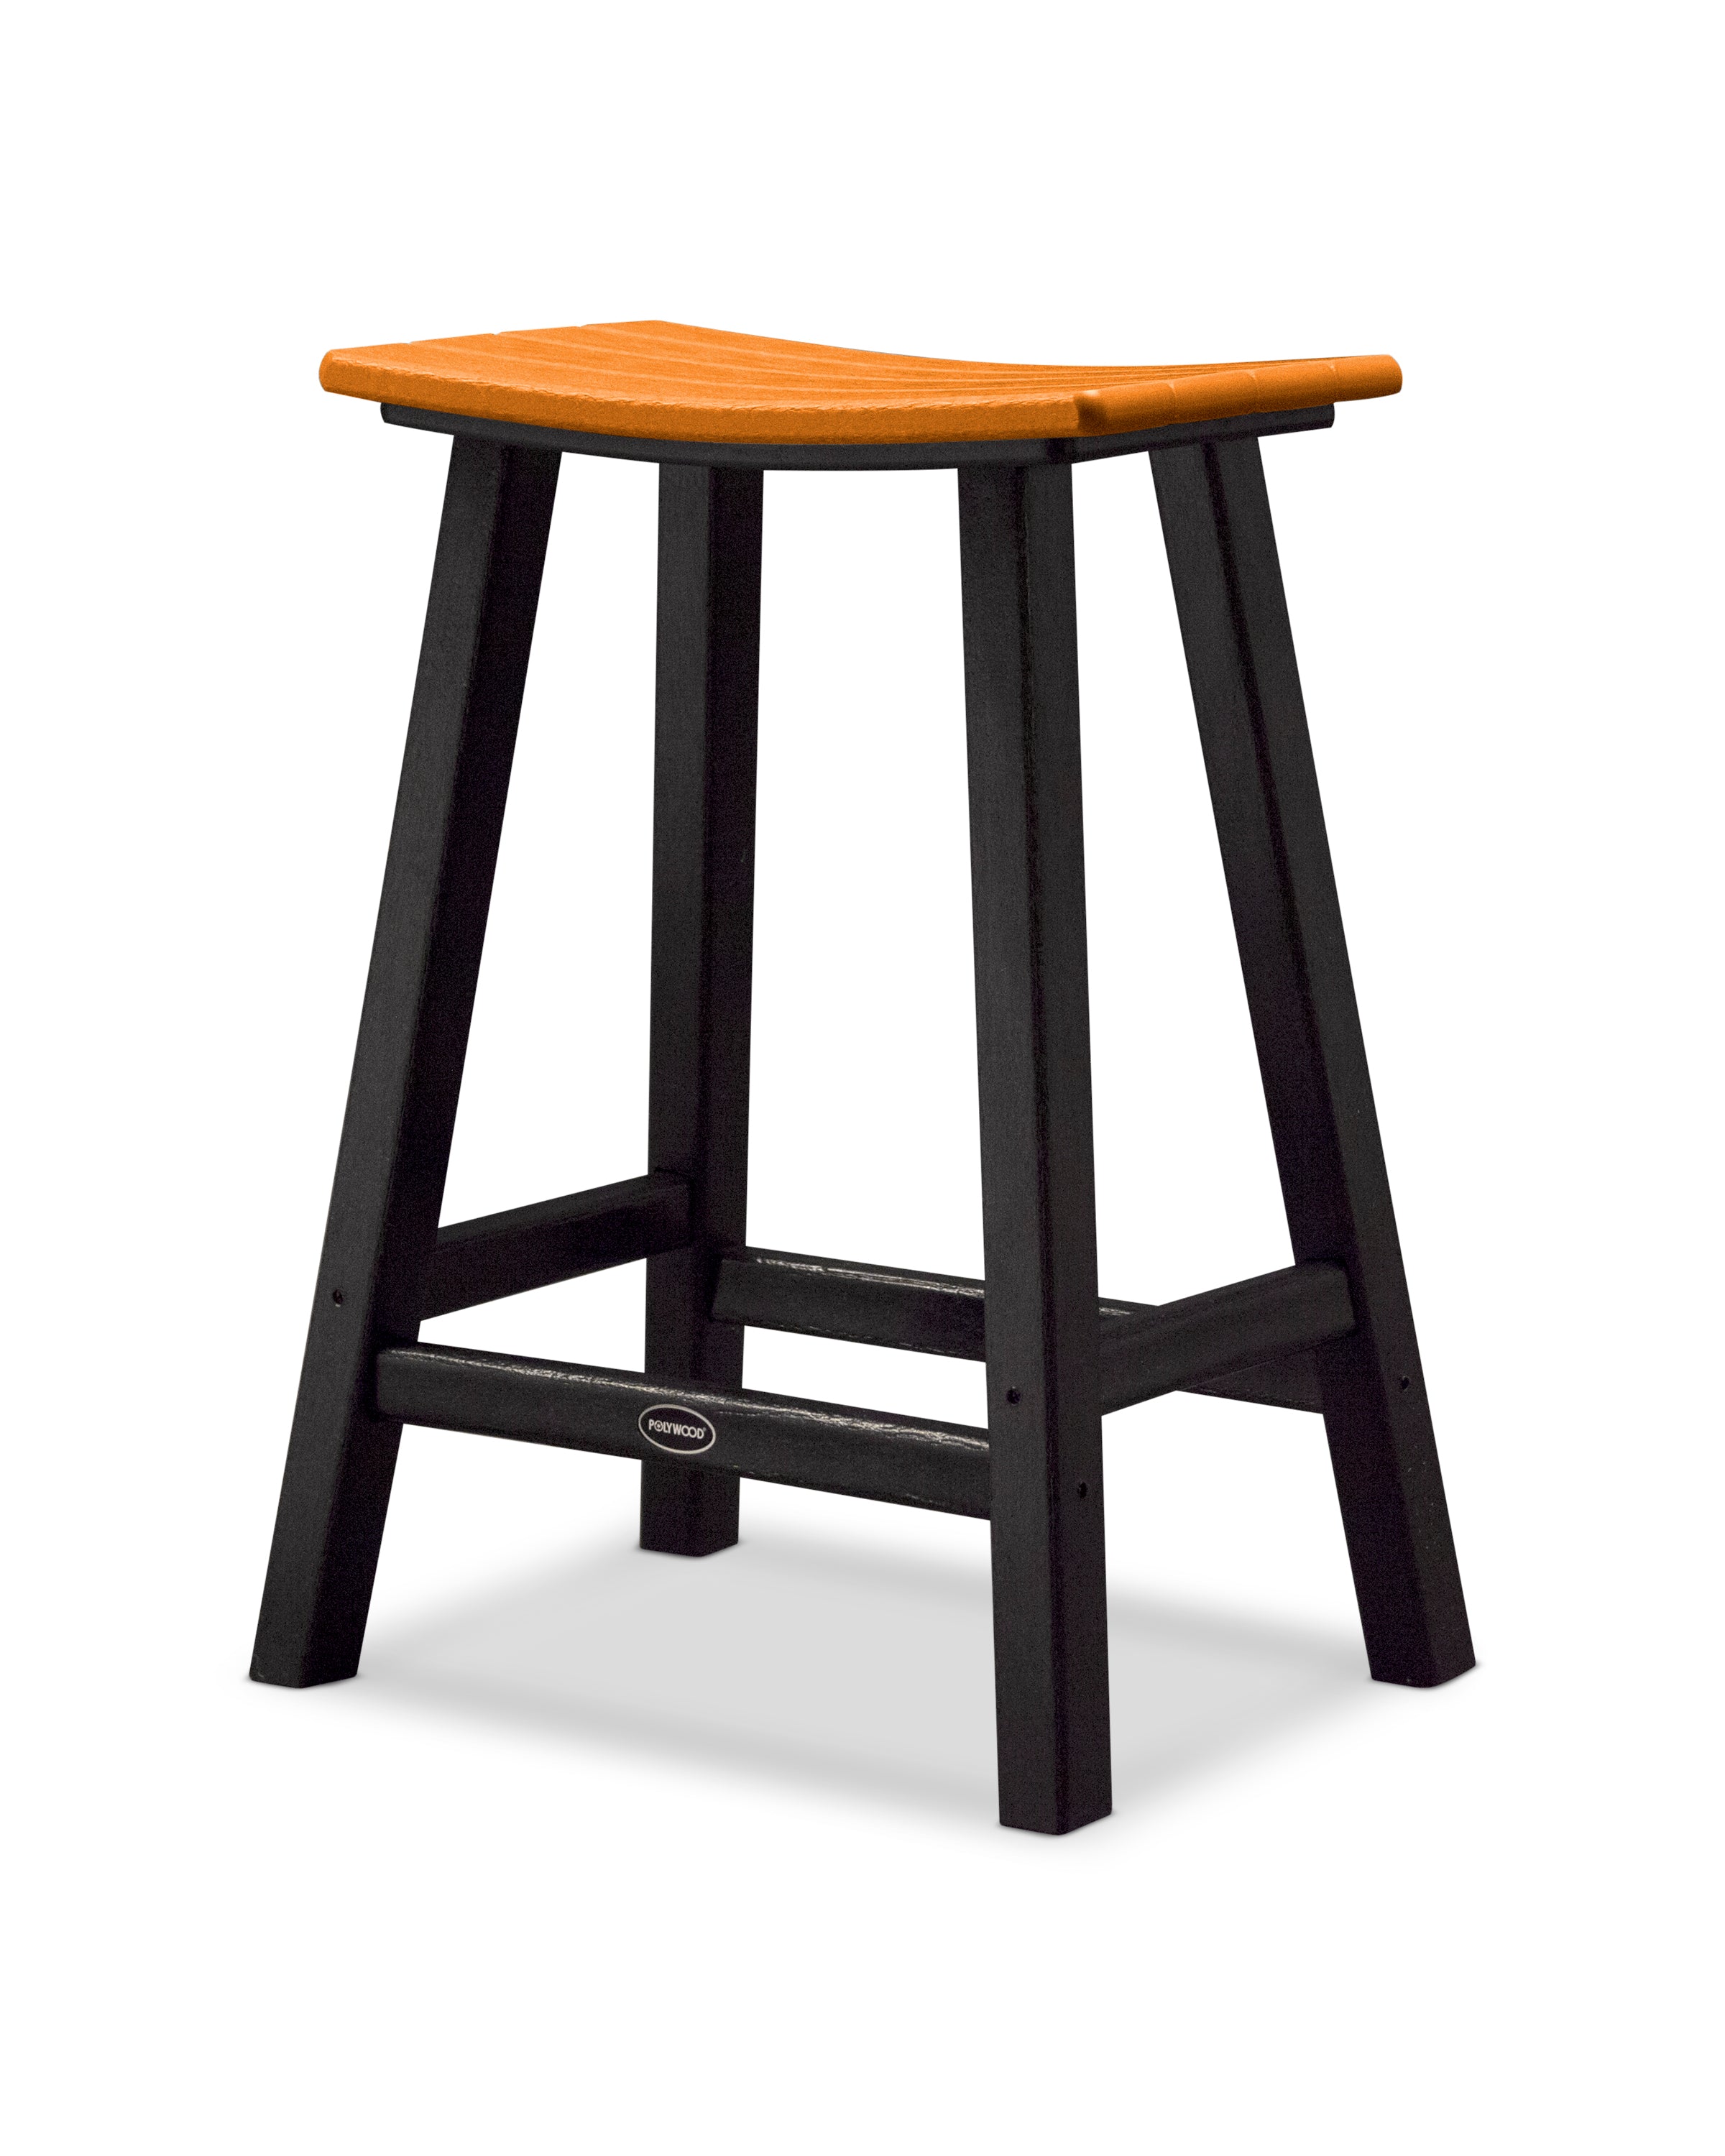 Polywood Contempo Saddle Counter Stool with Black Legs and Tangerine Seat Outdoor Chairs 12039489